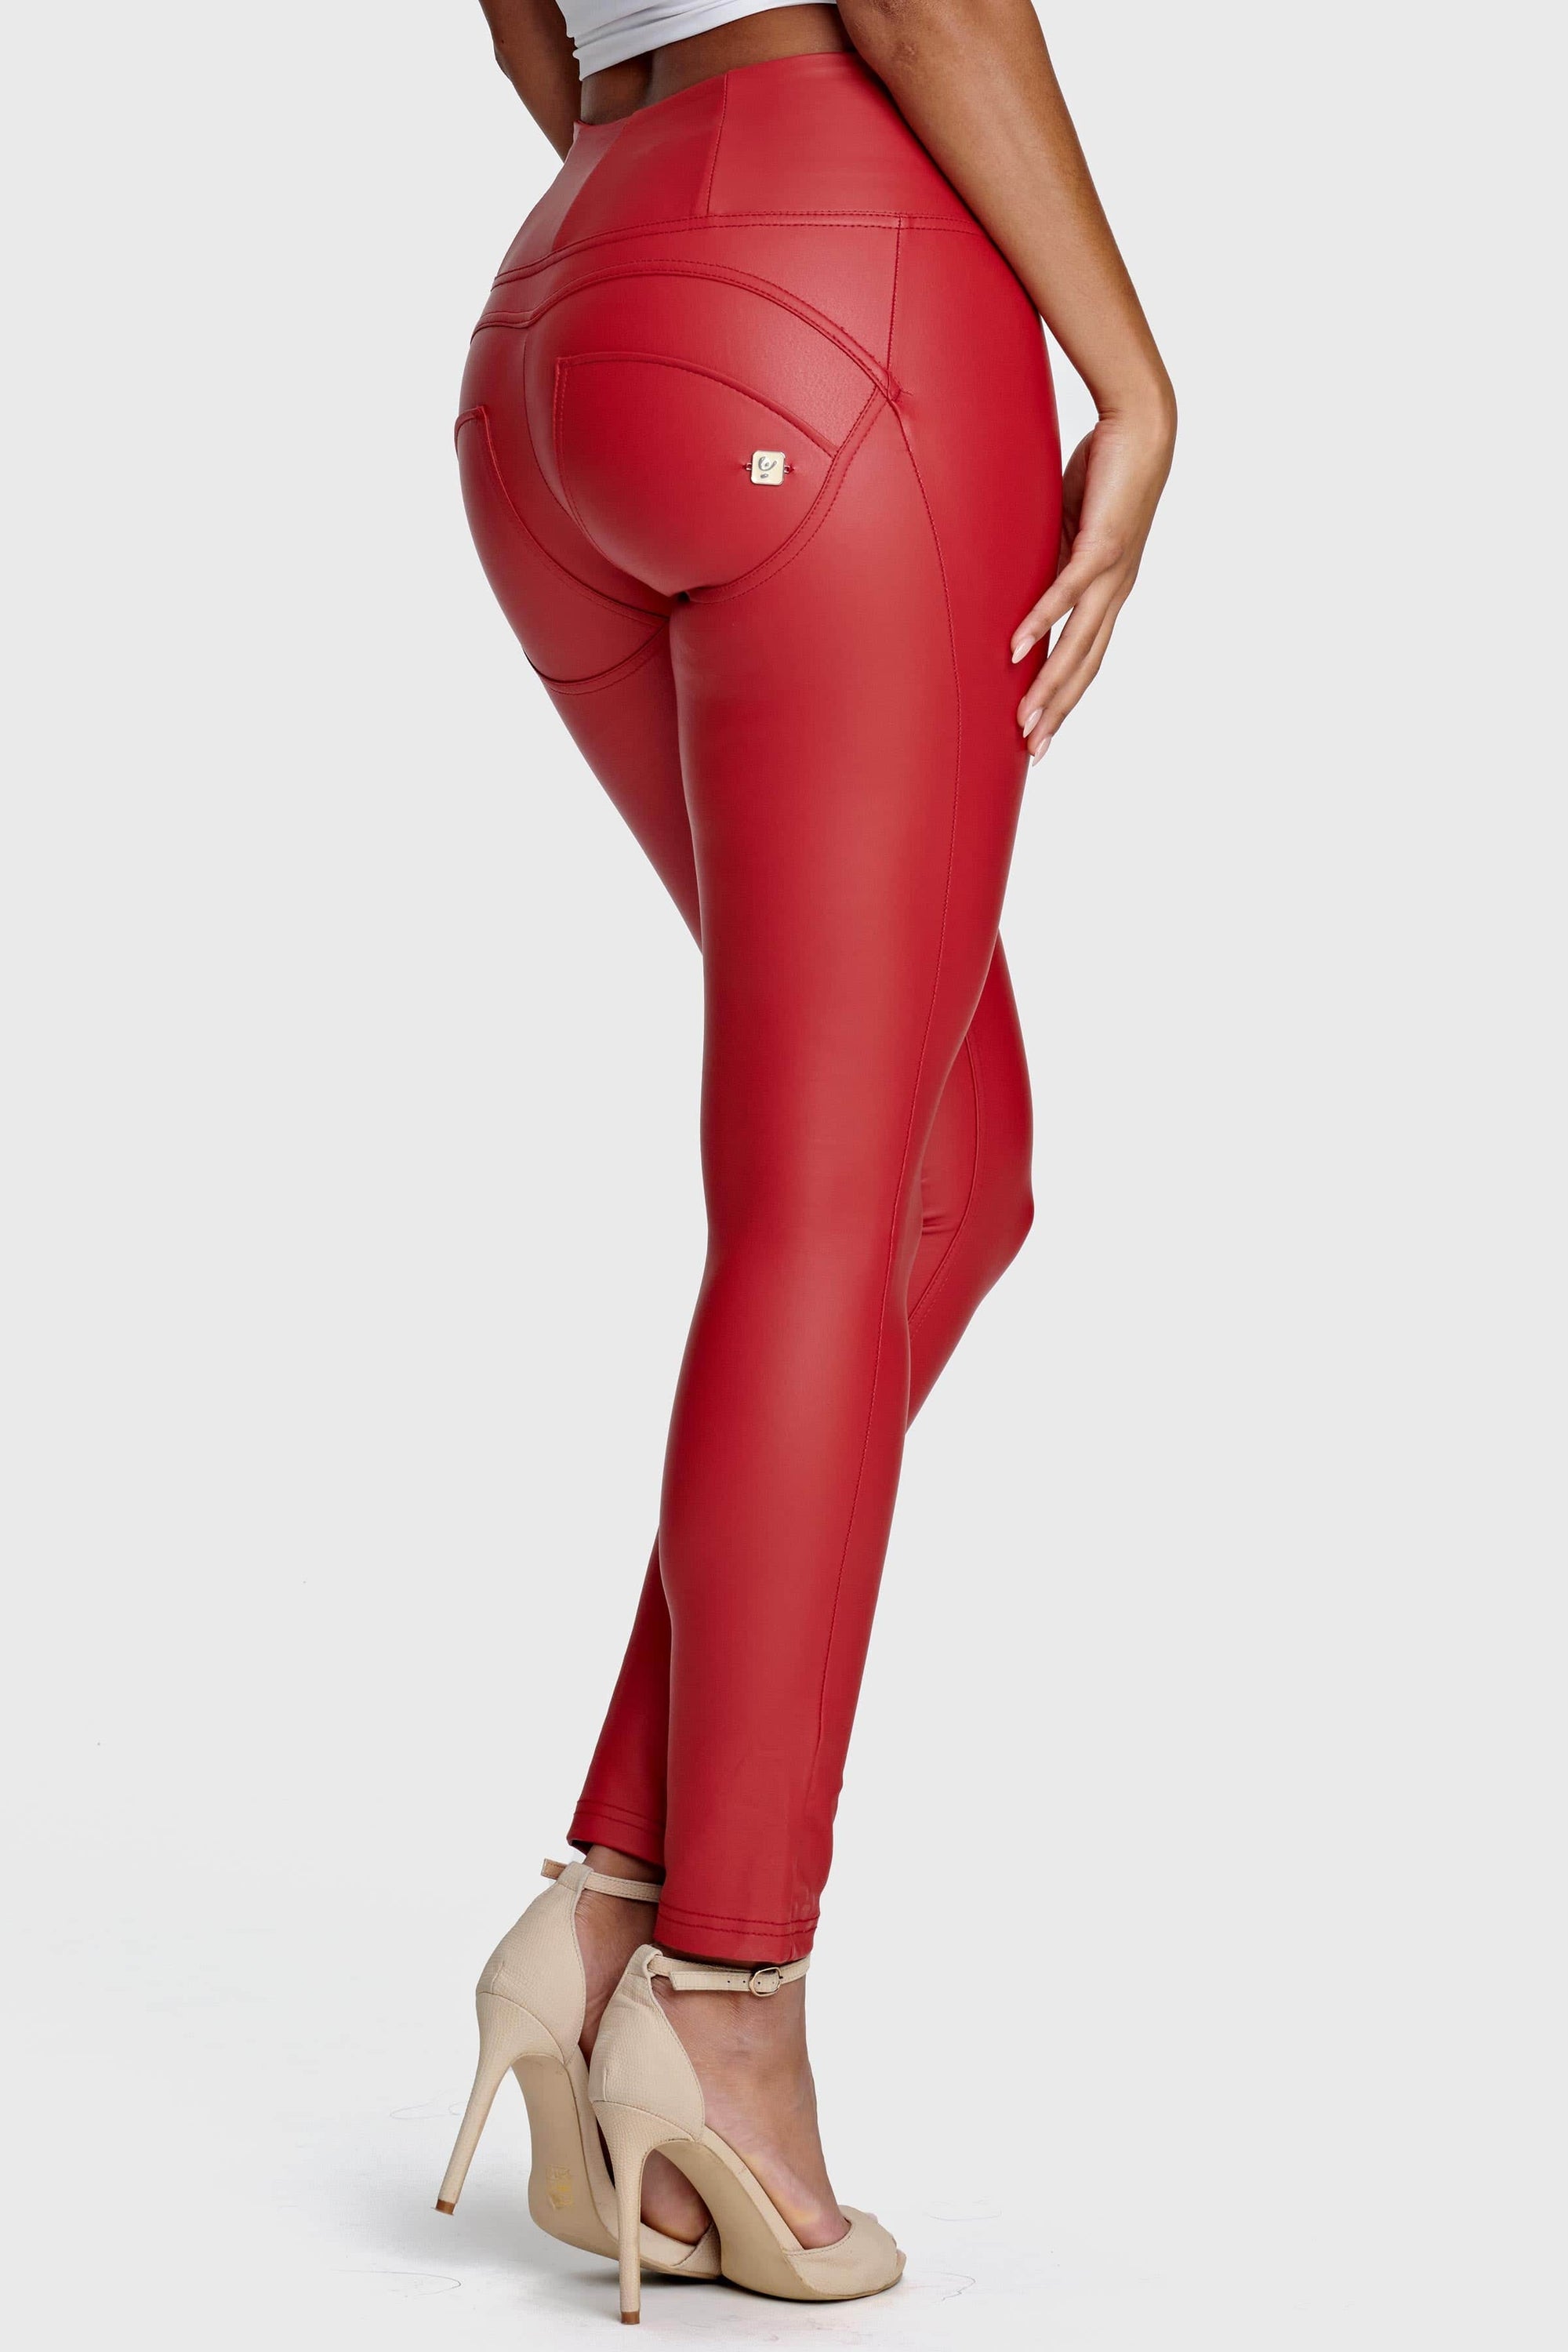 WR.UP® Faux Leather - High Waisted - Full Length - Red 5